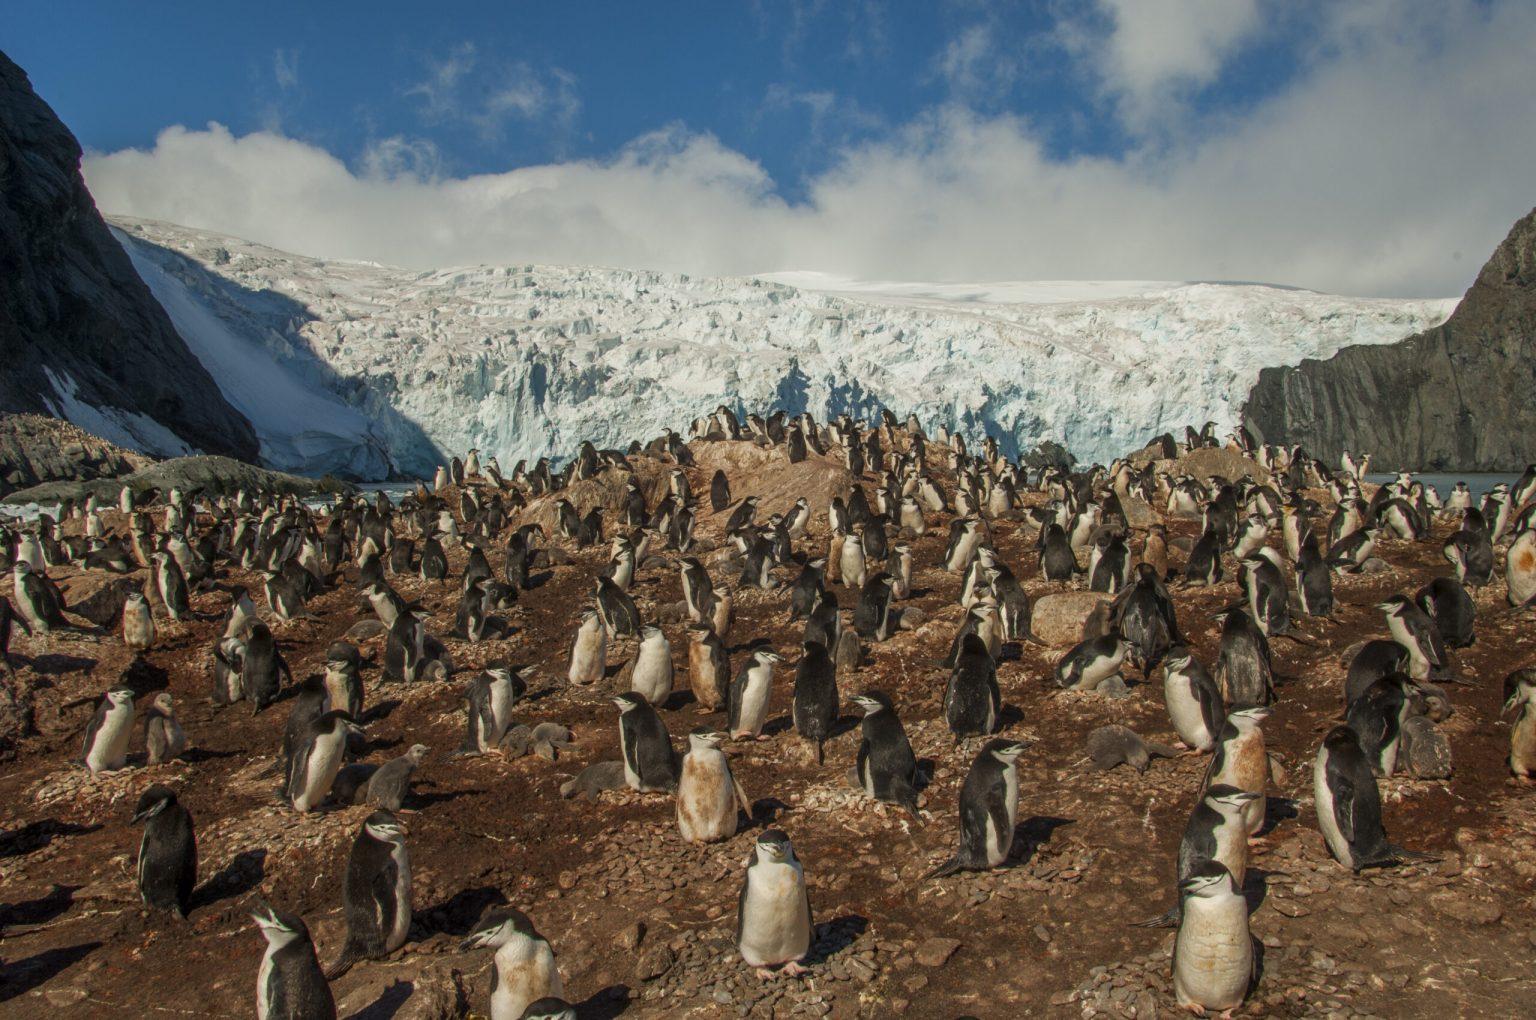 The Chinstrap penguin (Pygoscelis antarctica) colony with a glacier in the background at Point Wild, where the men of the Shackleton Endurance expedition 1914 to 16 survived, on Elephant Island, an island in the South Shetland Islands archipelago off the Antarctic Peninsula. Photo and story credits by Wolfgang Kaehler